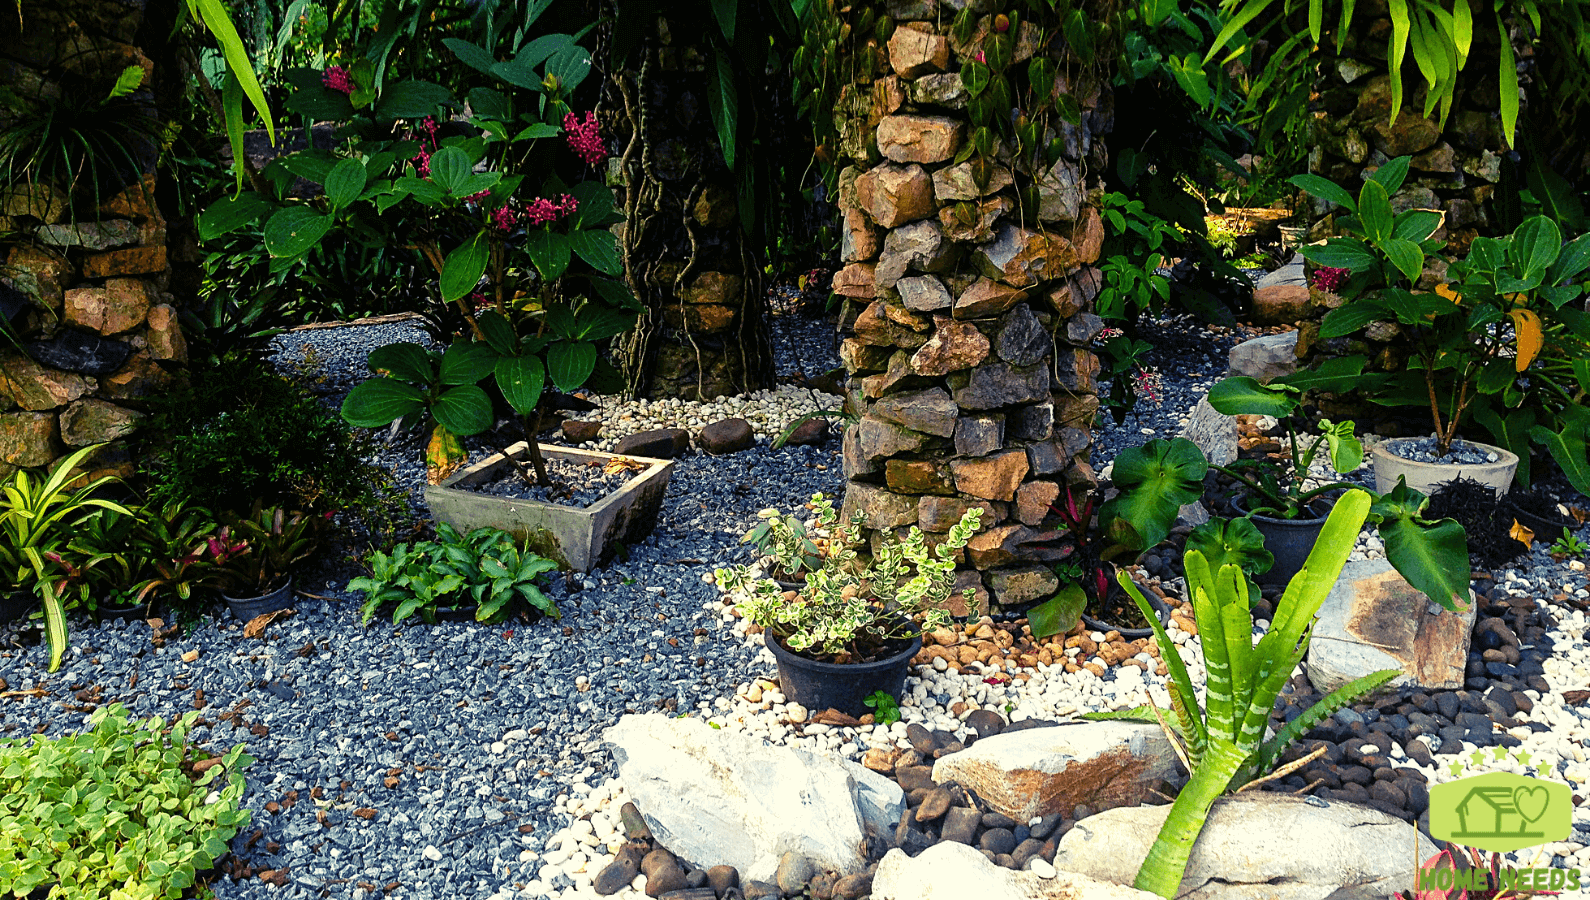 Size and Atmosphere Peal of the Rock Garden